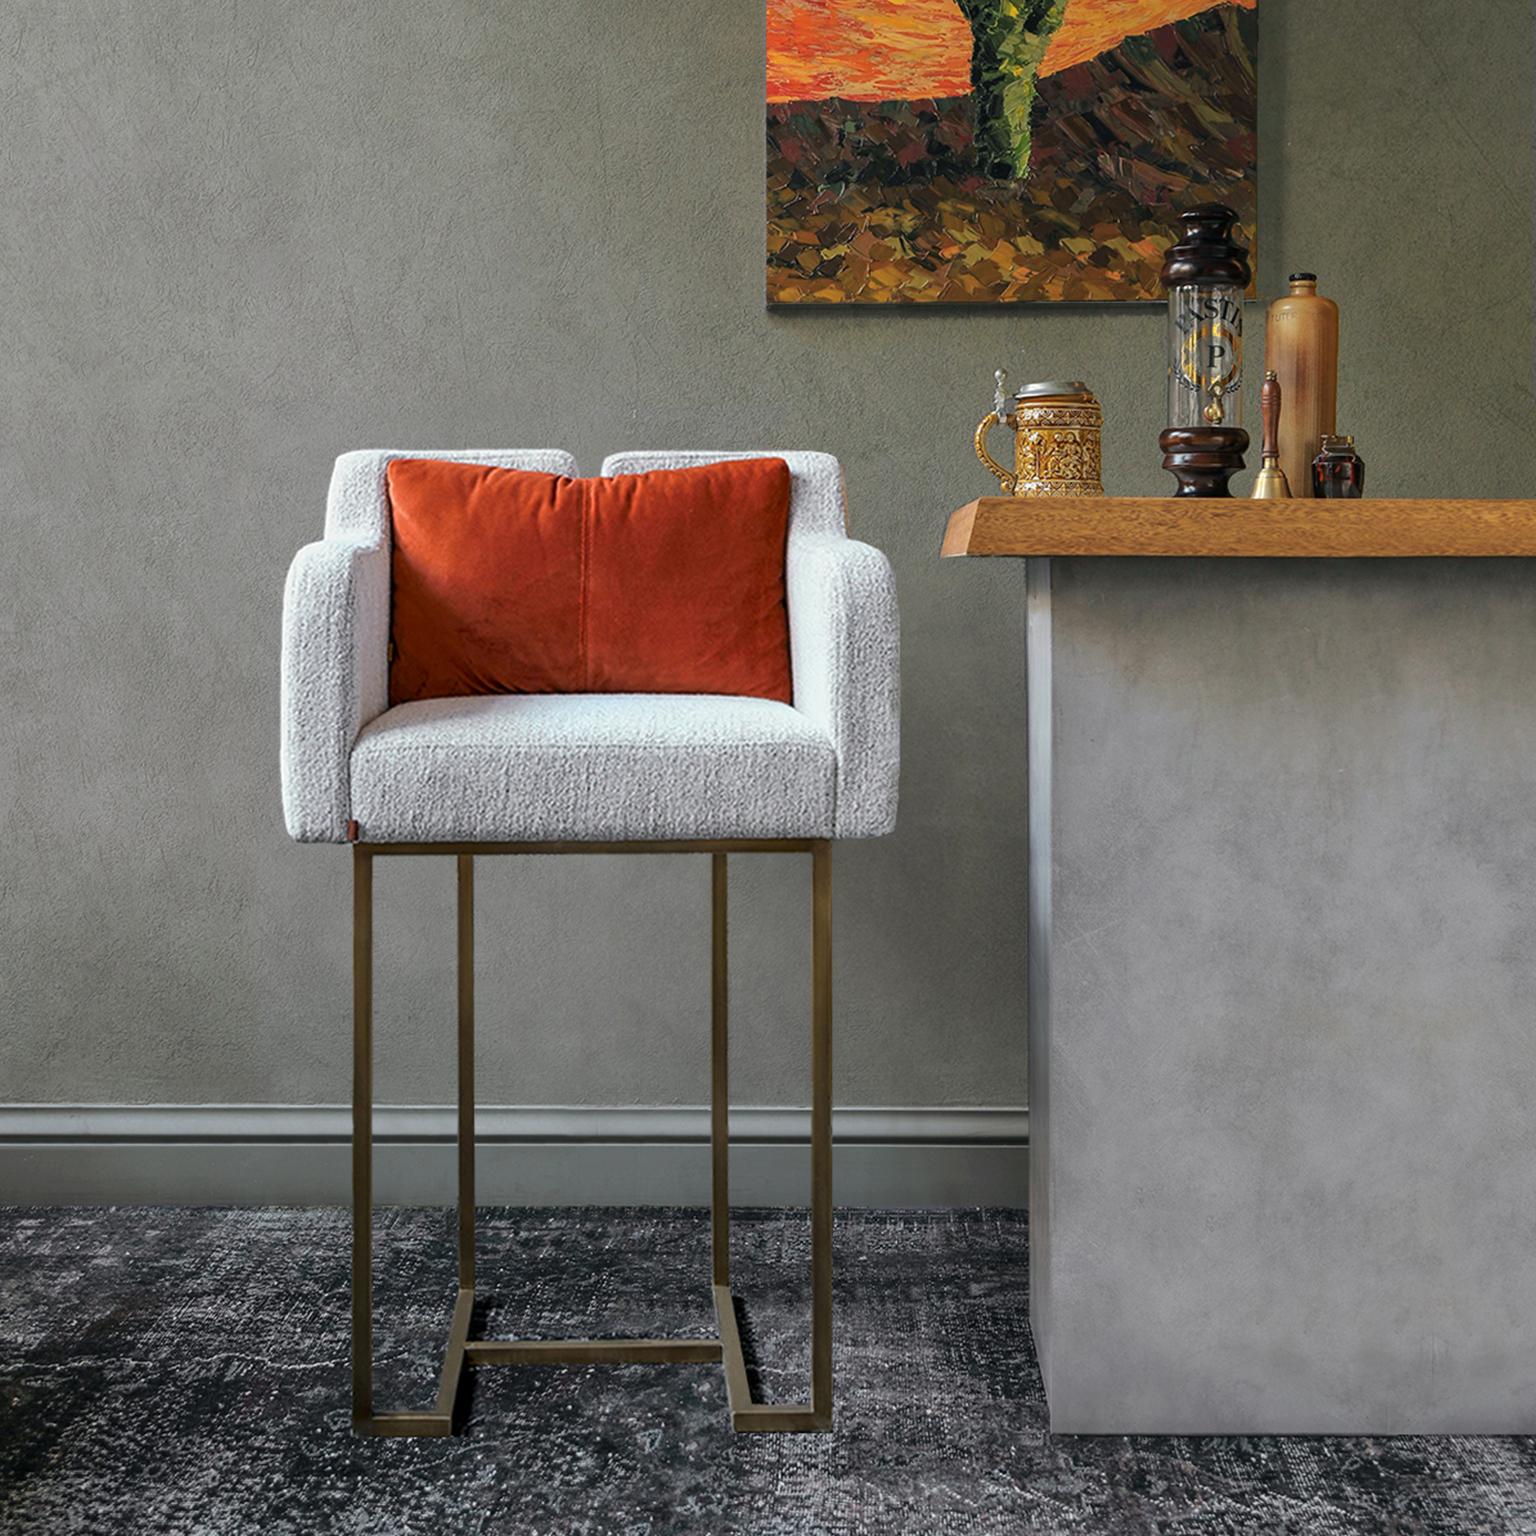 Papillonne Bar chair comes to your living area with its details, combining comfort with elegance. 

Dimensions: Length: 23.6'' / Depth: 19.6'' / Height: 39.3'' / Seat Height: 27.5''

Materials: Brass
Alternatives: Matt chrome, black painted metal,